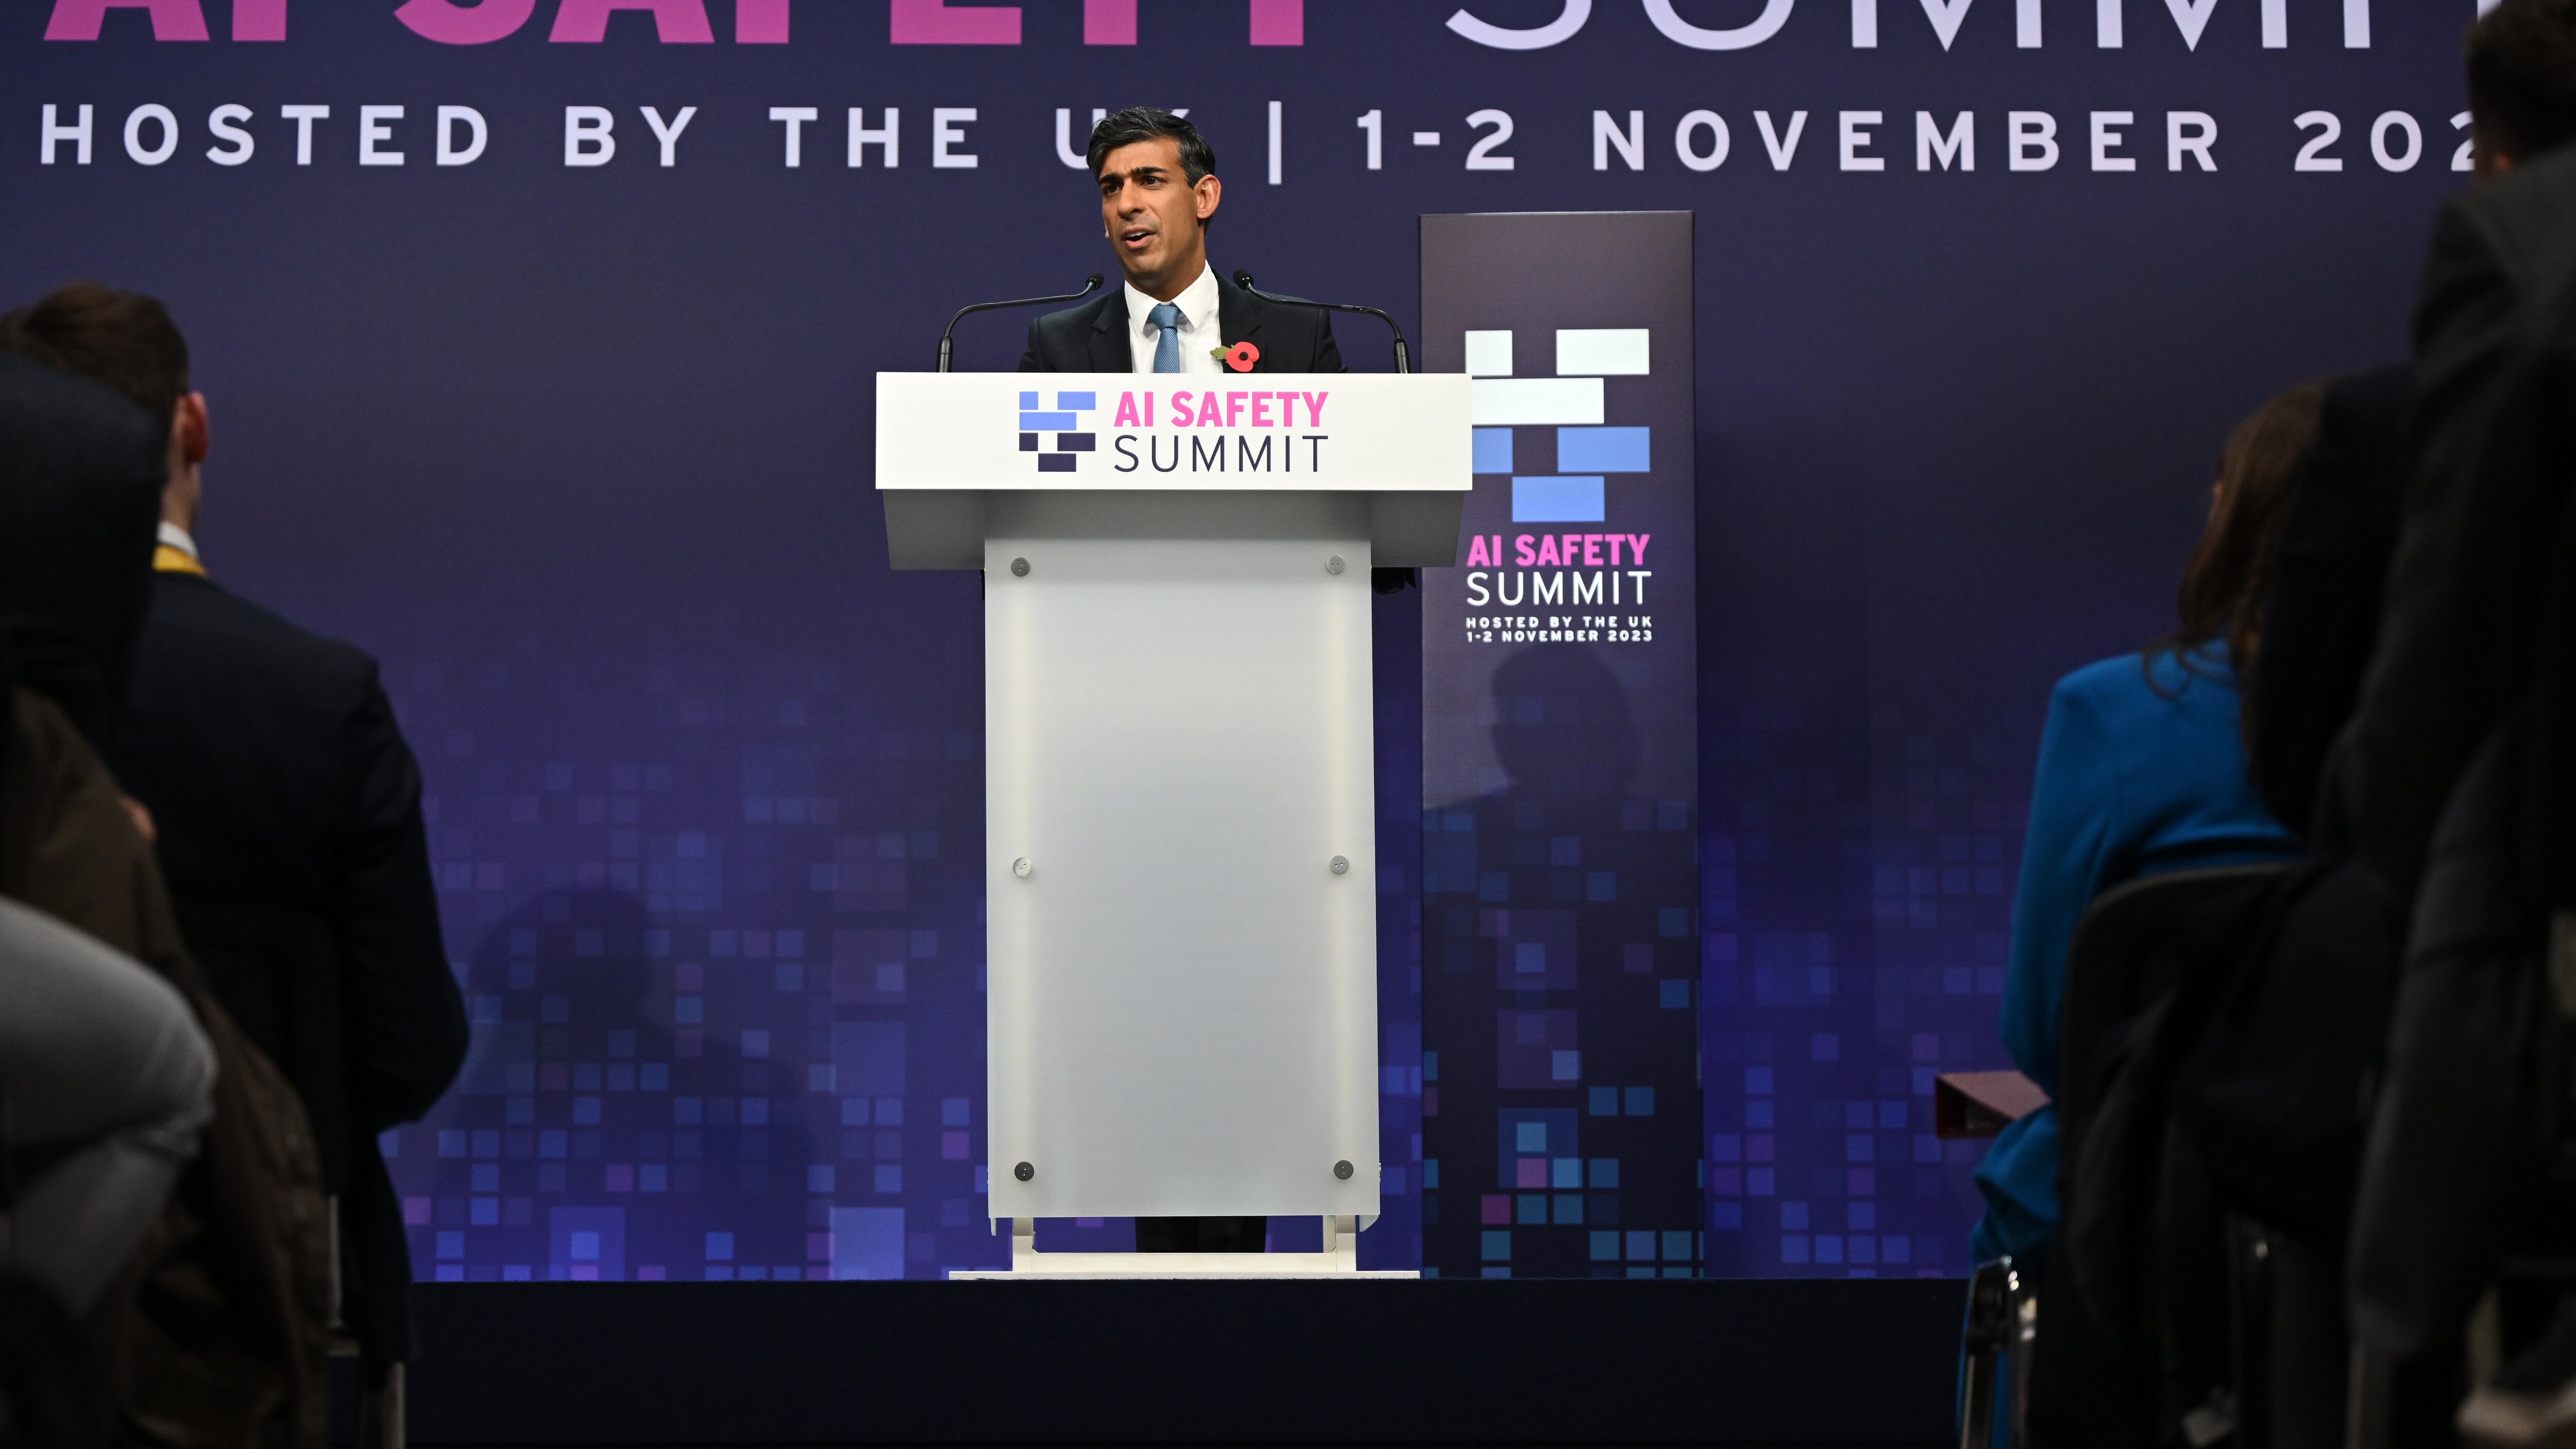 Prime Minister Rishi Sunak speaks at the AI safety summit